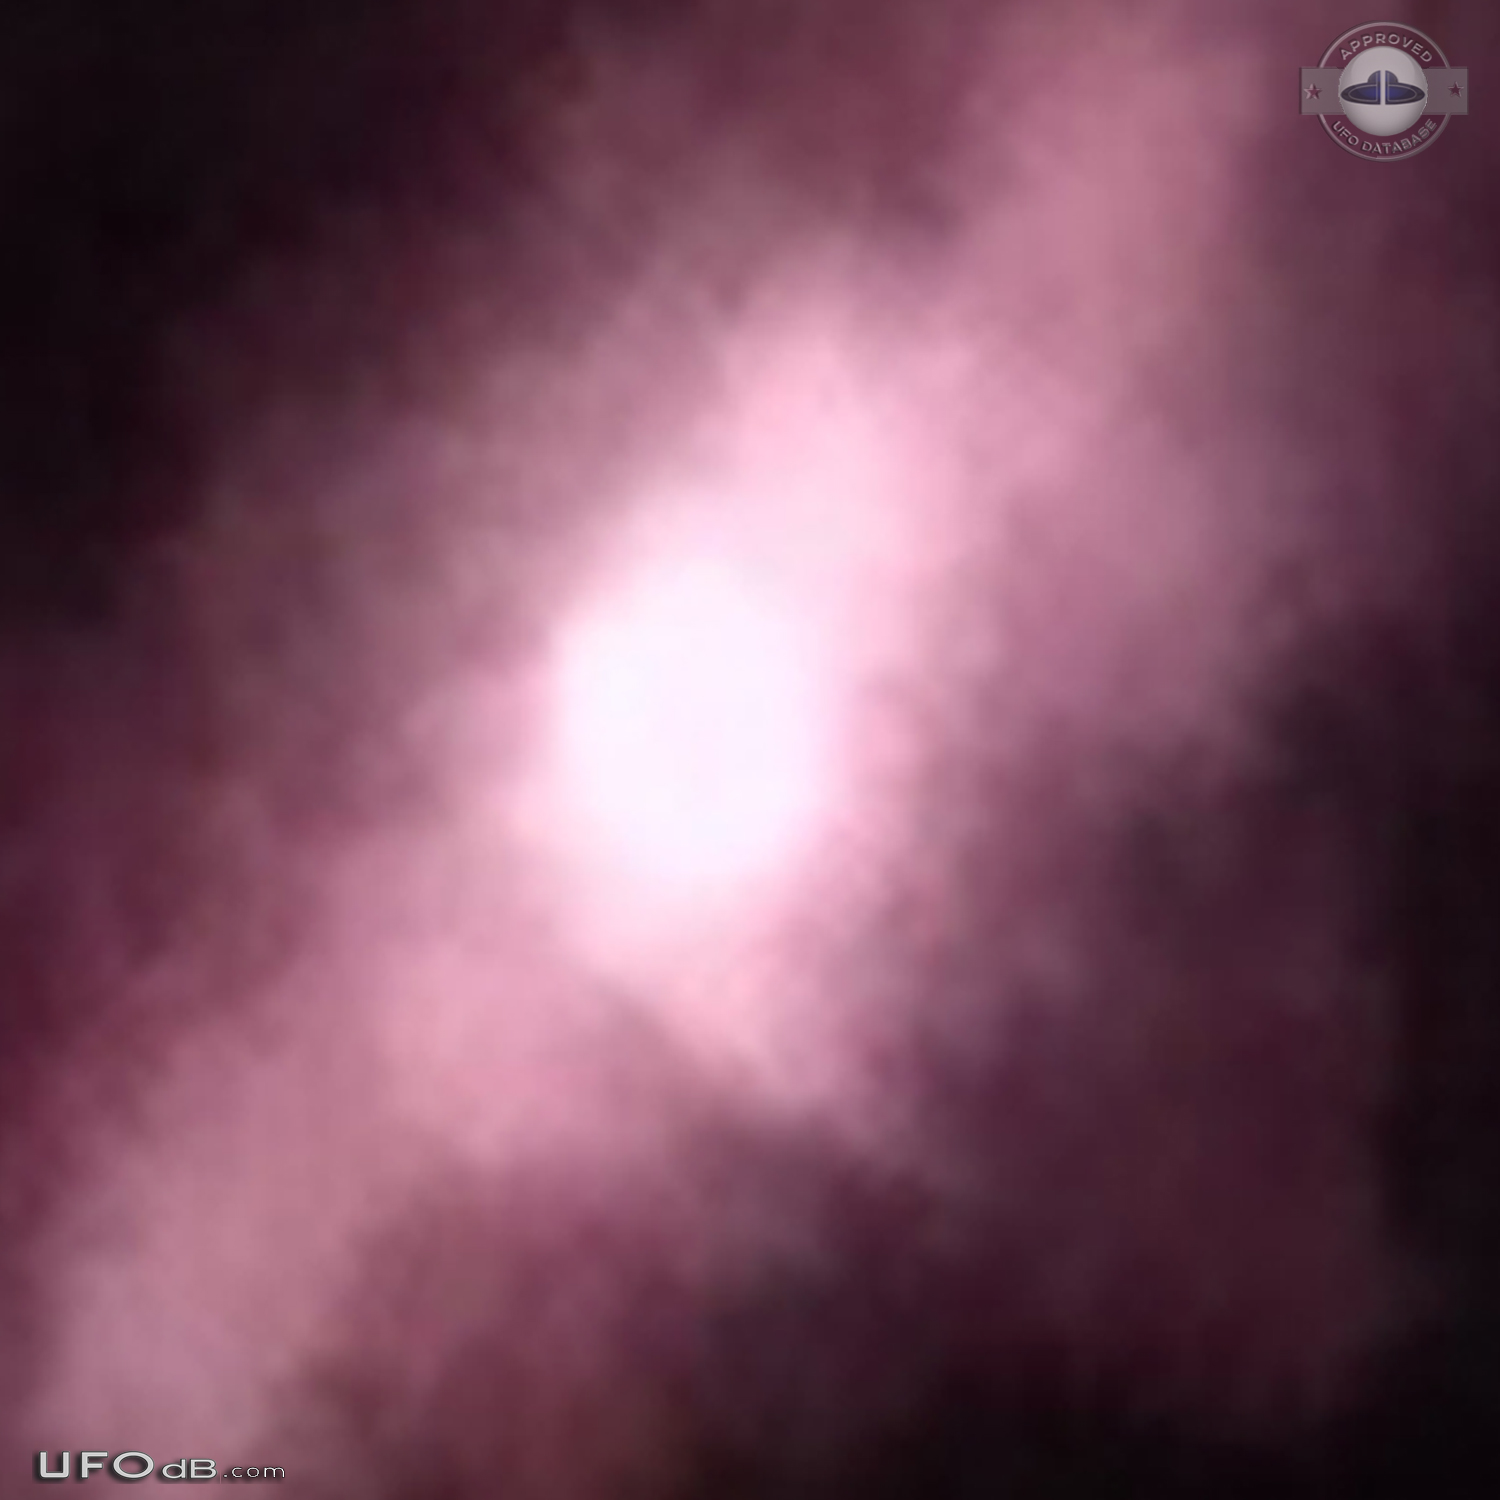 three star-like UFOs moving around in the sky - Orem Utah USA 2014 UFO Picture #701-4